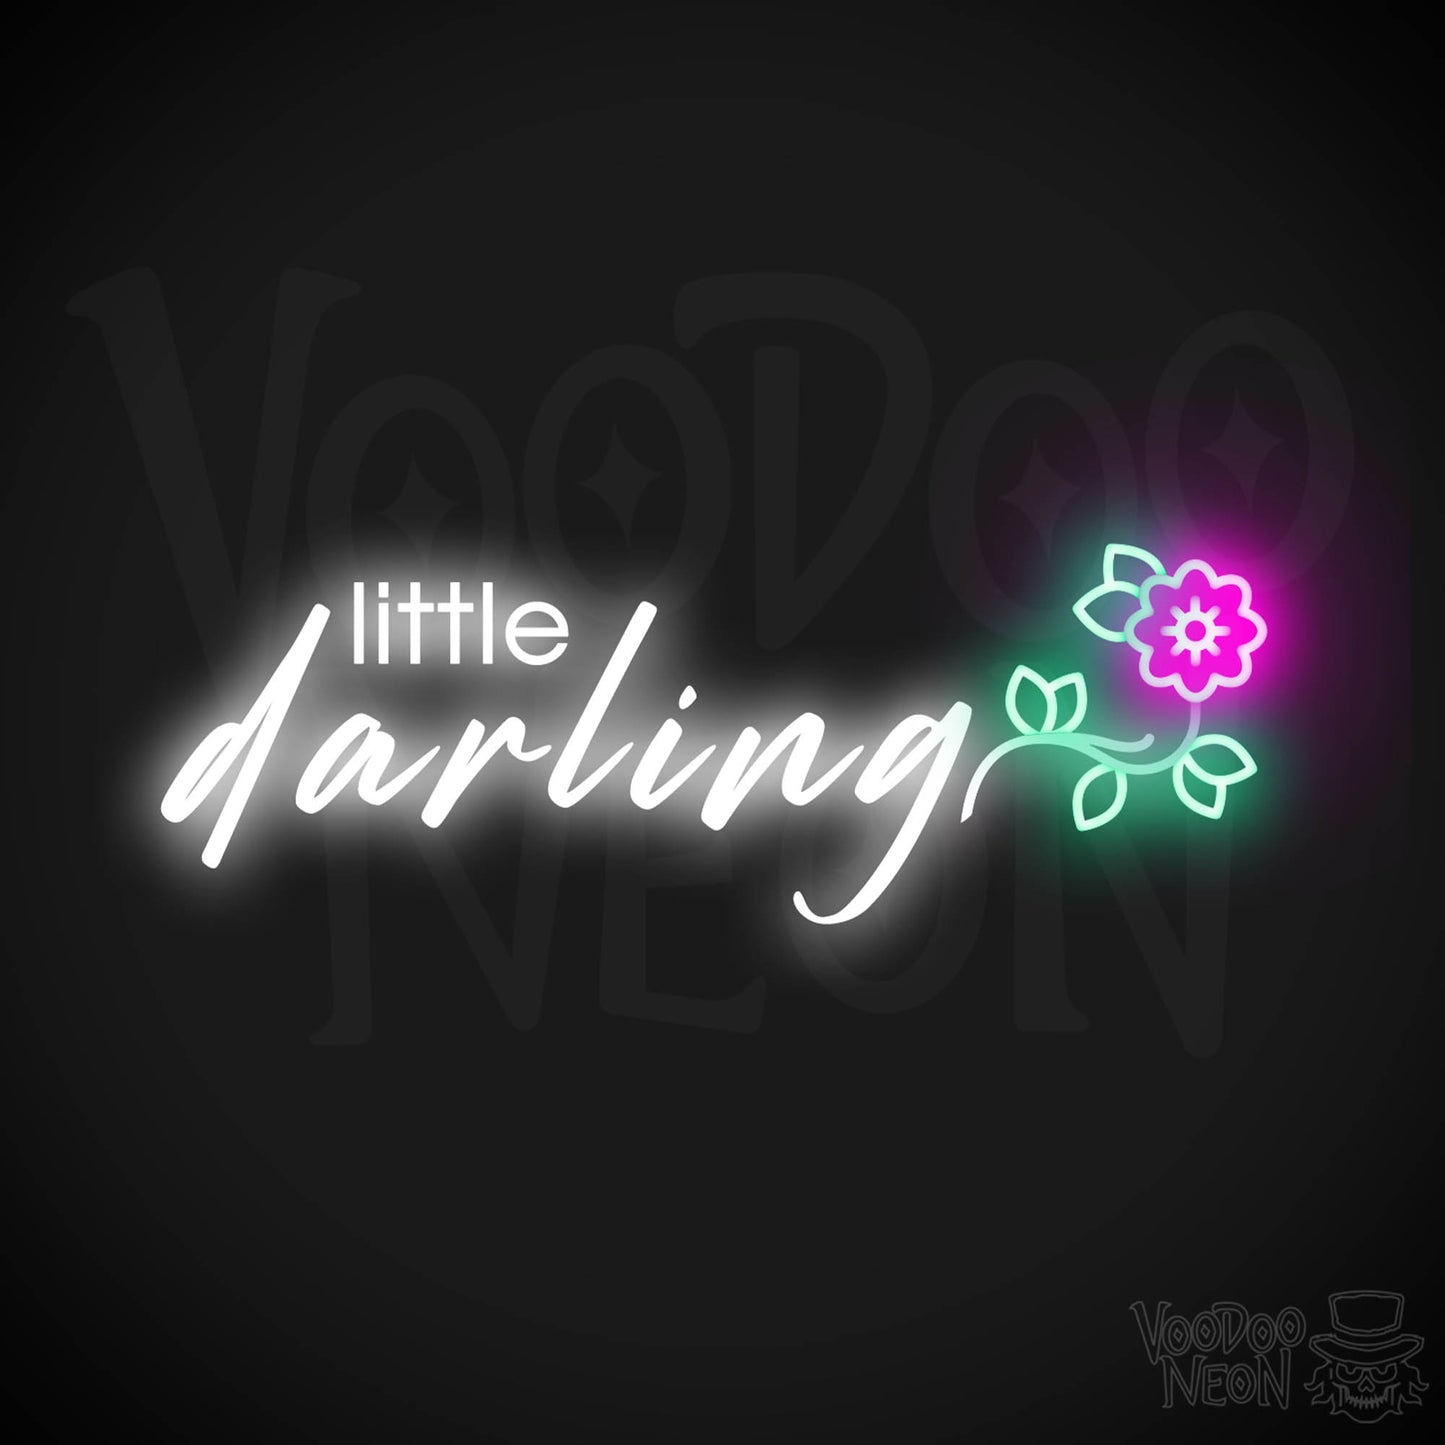 Little Darling Neon Sign - Neon Little Darling Sign - Color Multi-Color